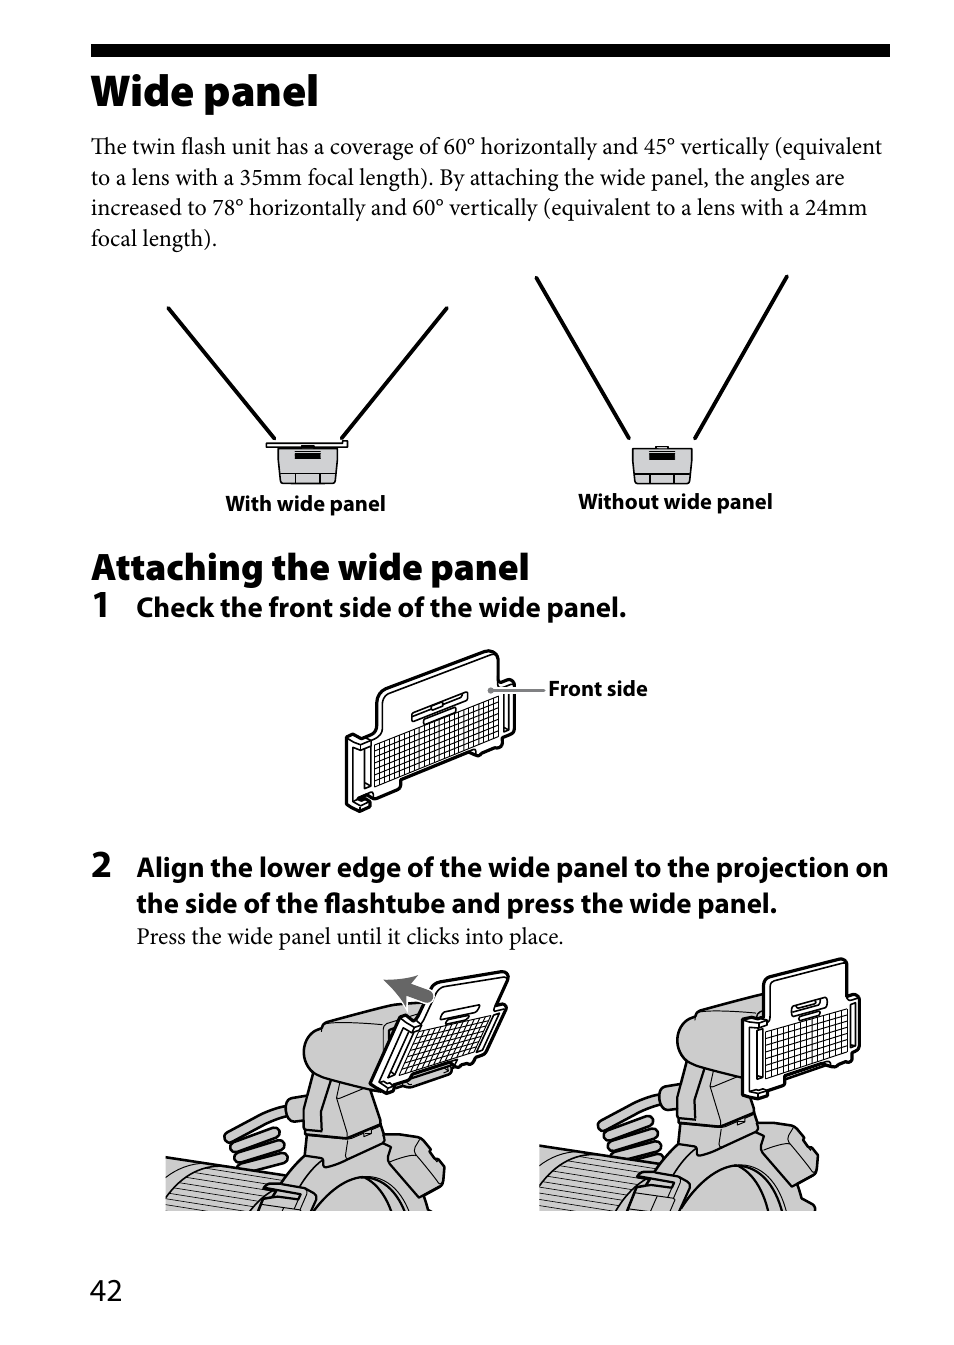 Wide panel, Attaching the wide panel 1 | Sony HVL-MT24AM User Manual | Page 42 / 295